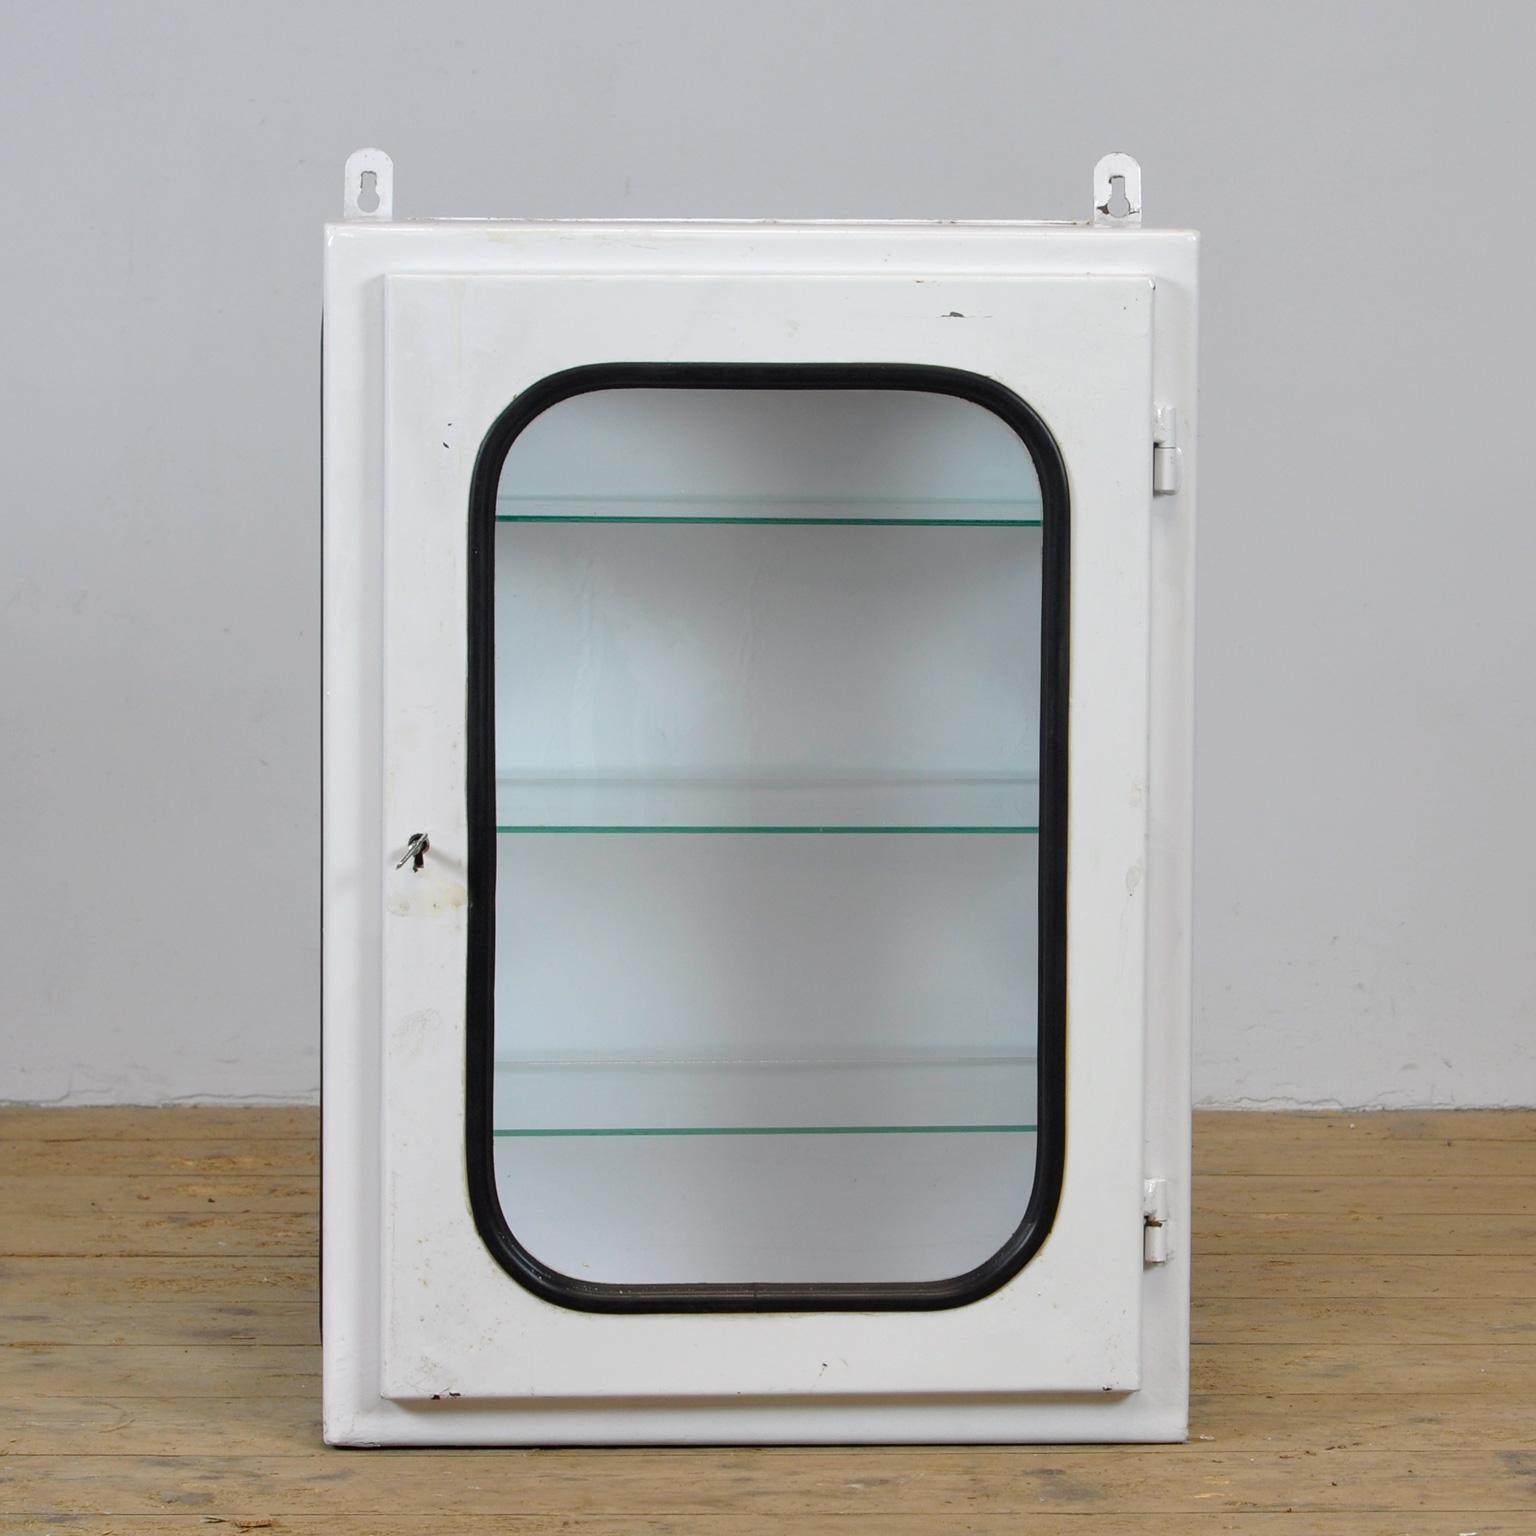 This medical cabinet was designed in the 1970s and produced circa 1975 in hungary. It was used in a hospital in budapest. It is made of iron and glass. The glass is held by a black rubber strip. The cabinet comes with three adjustable glass shelves. 